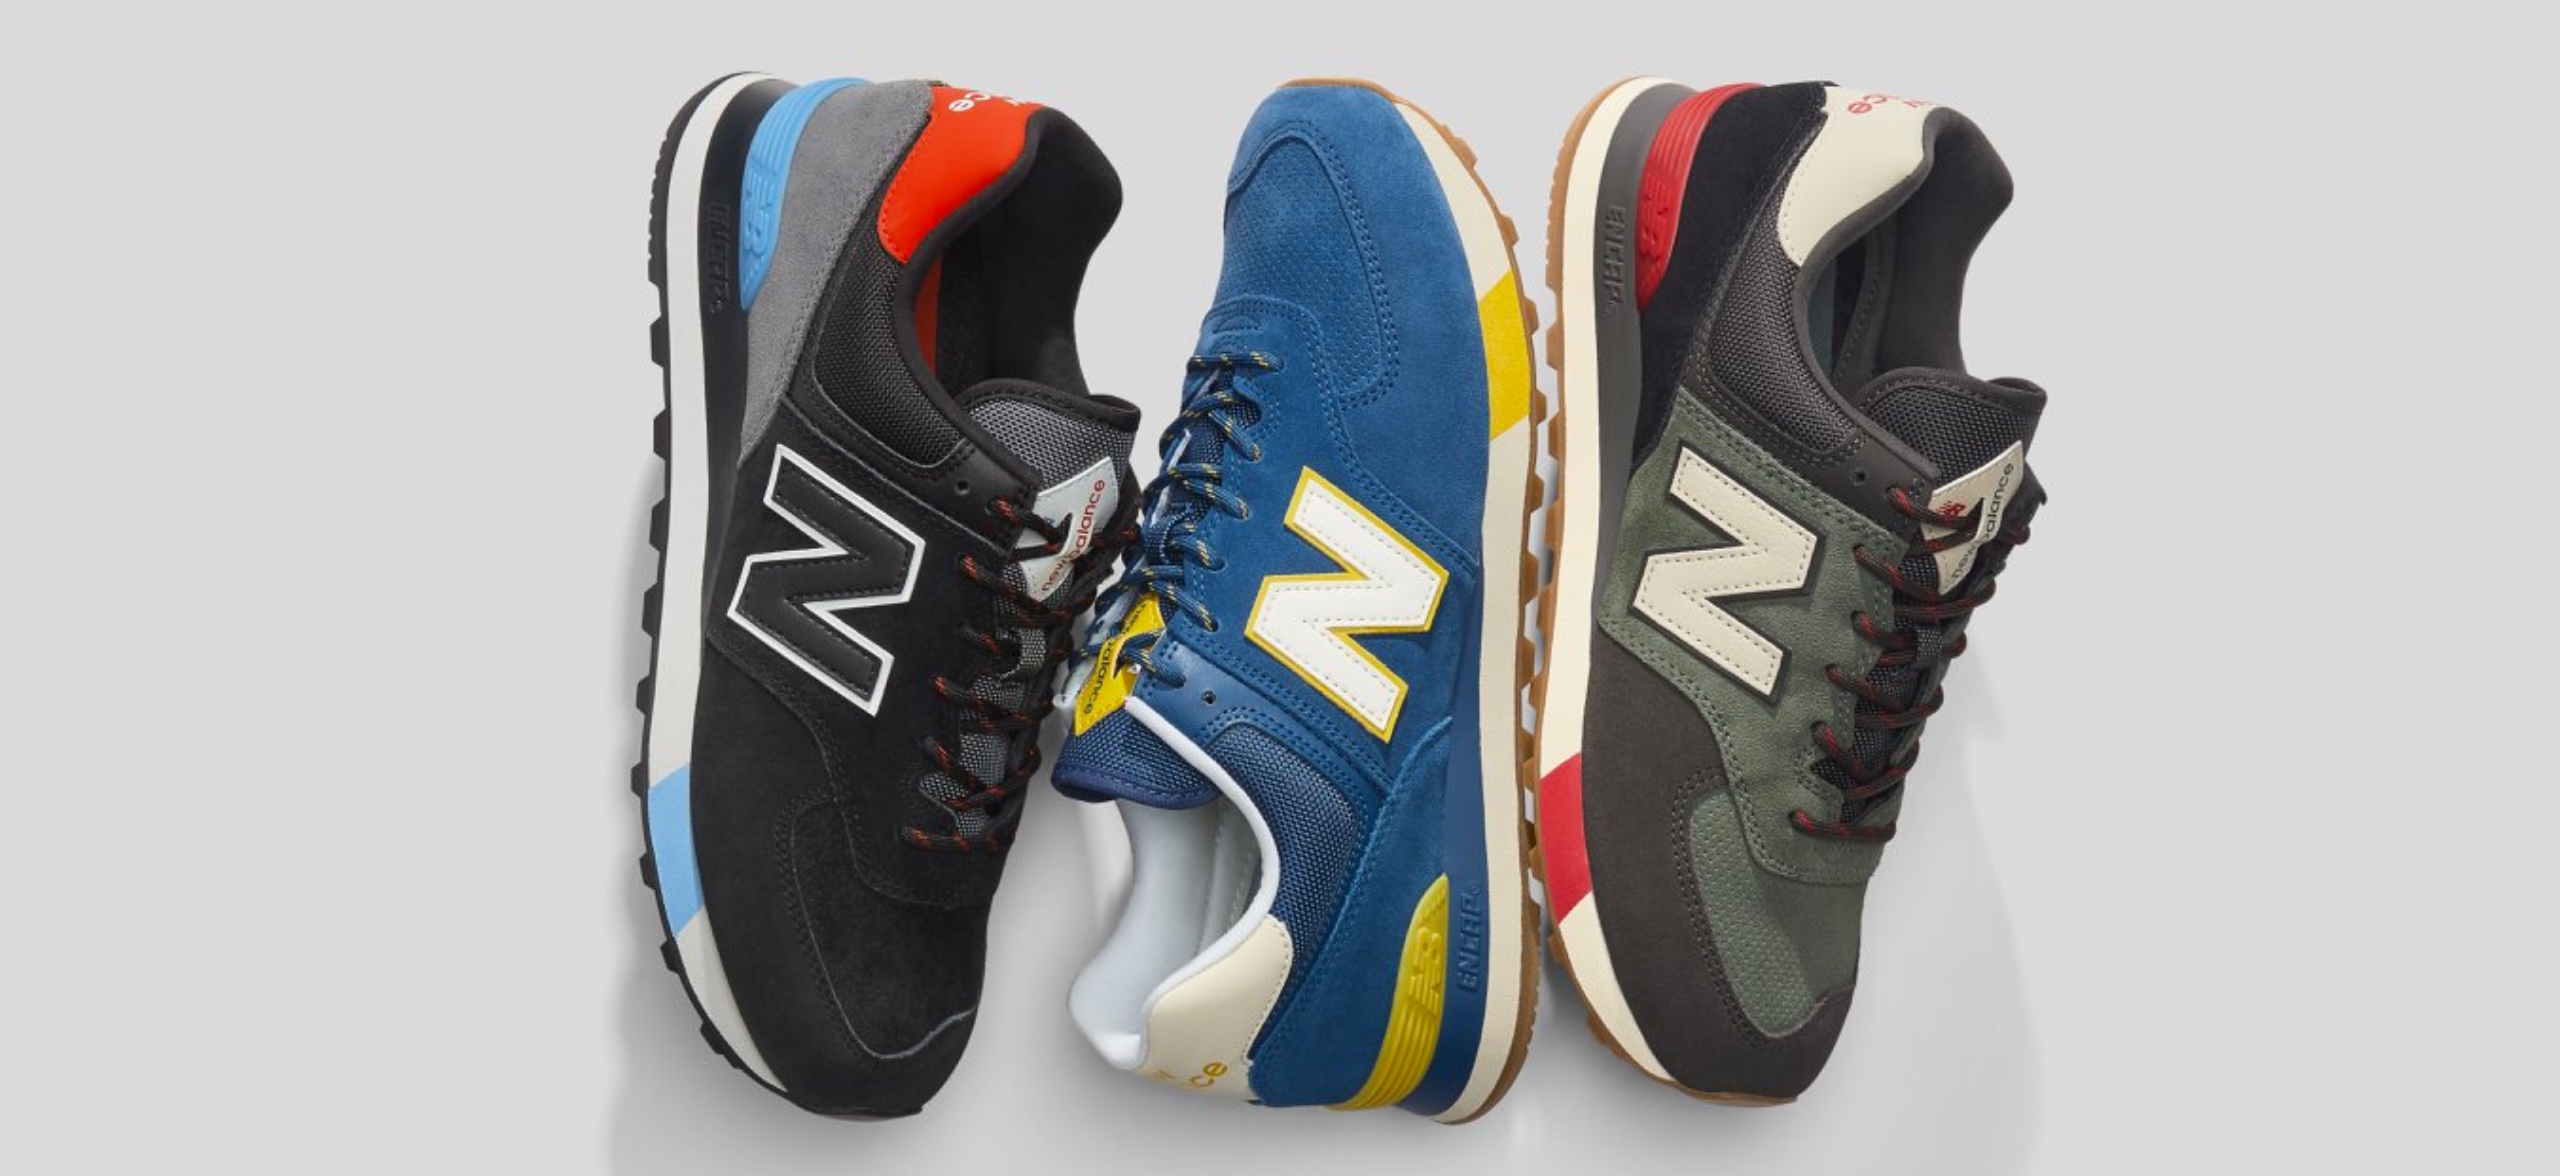 Spit out quarter Sea Joe's New Balance Holiday Savings Event offers extra 20% off all orders +  free shipping